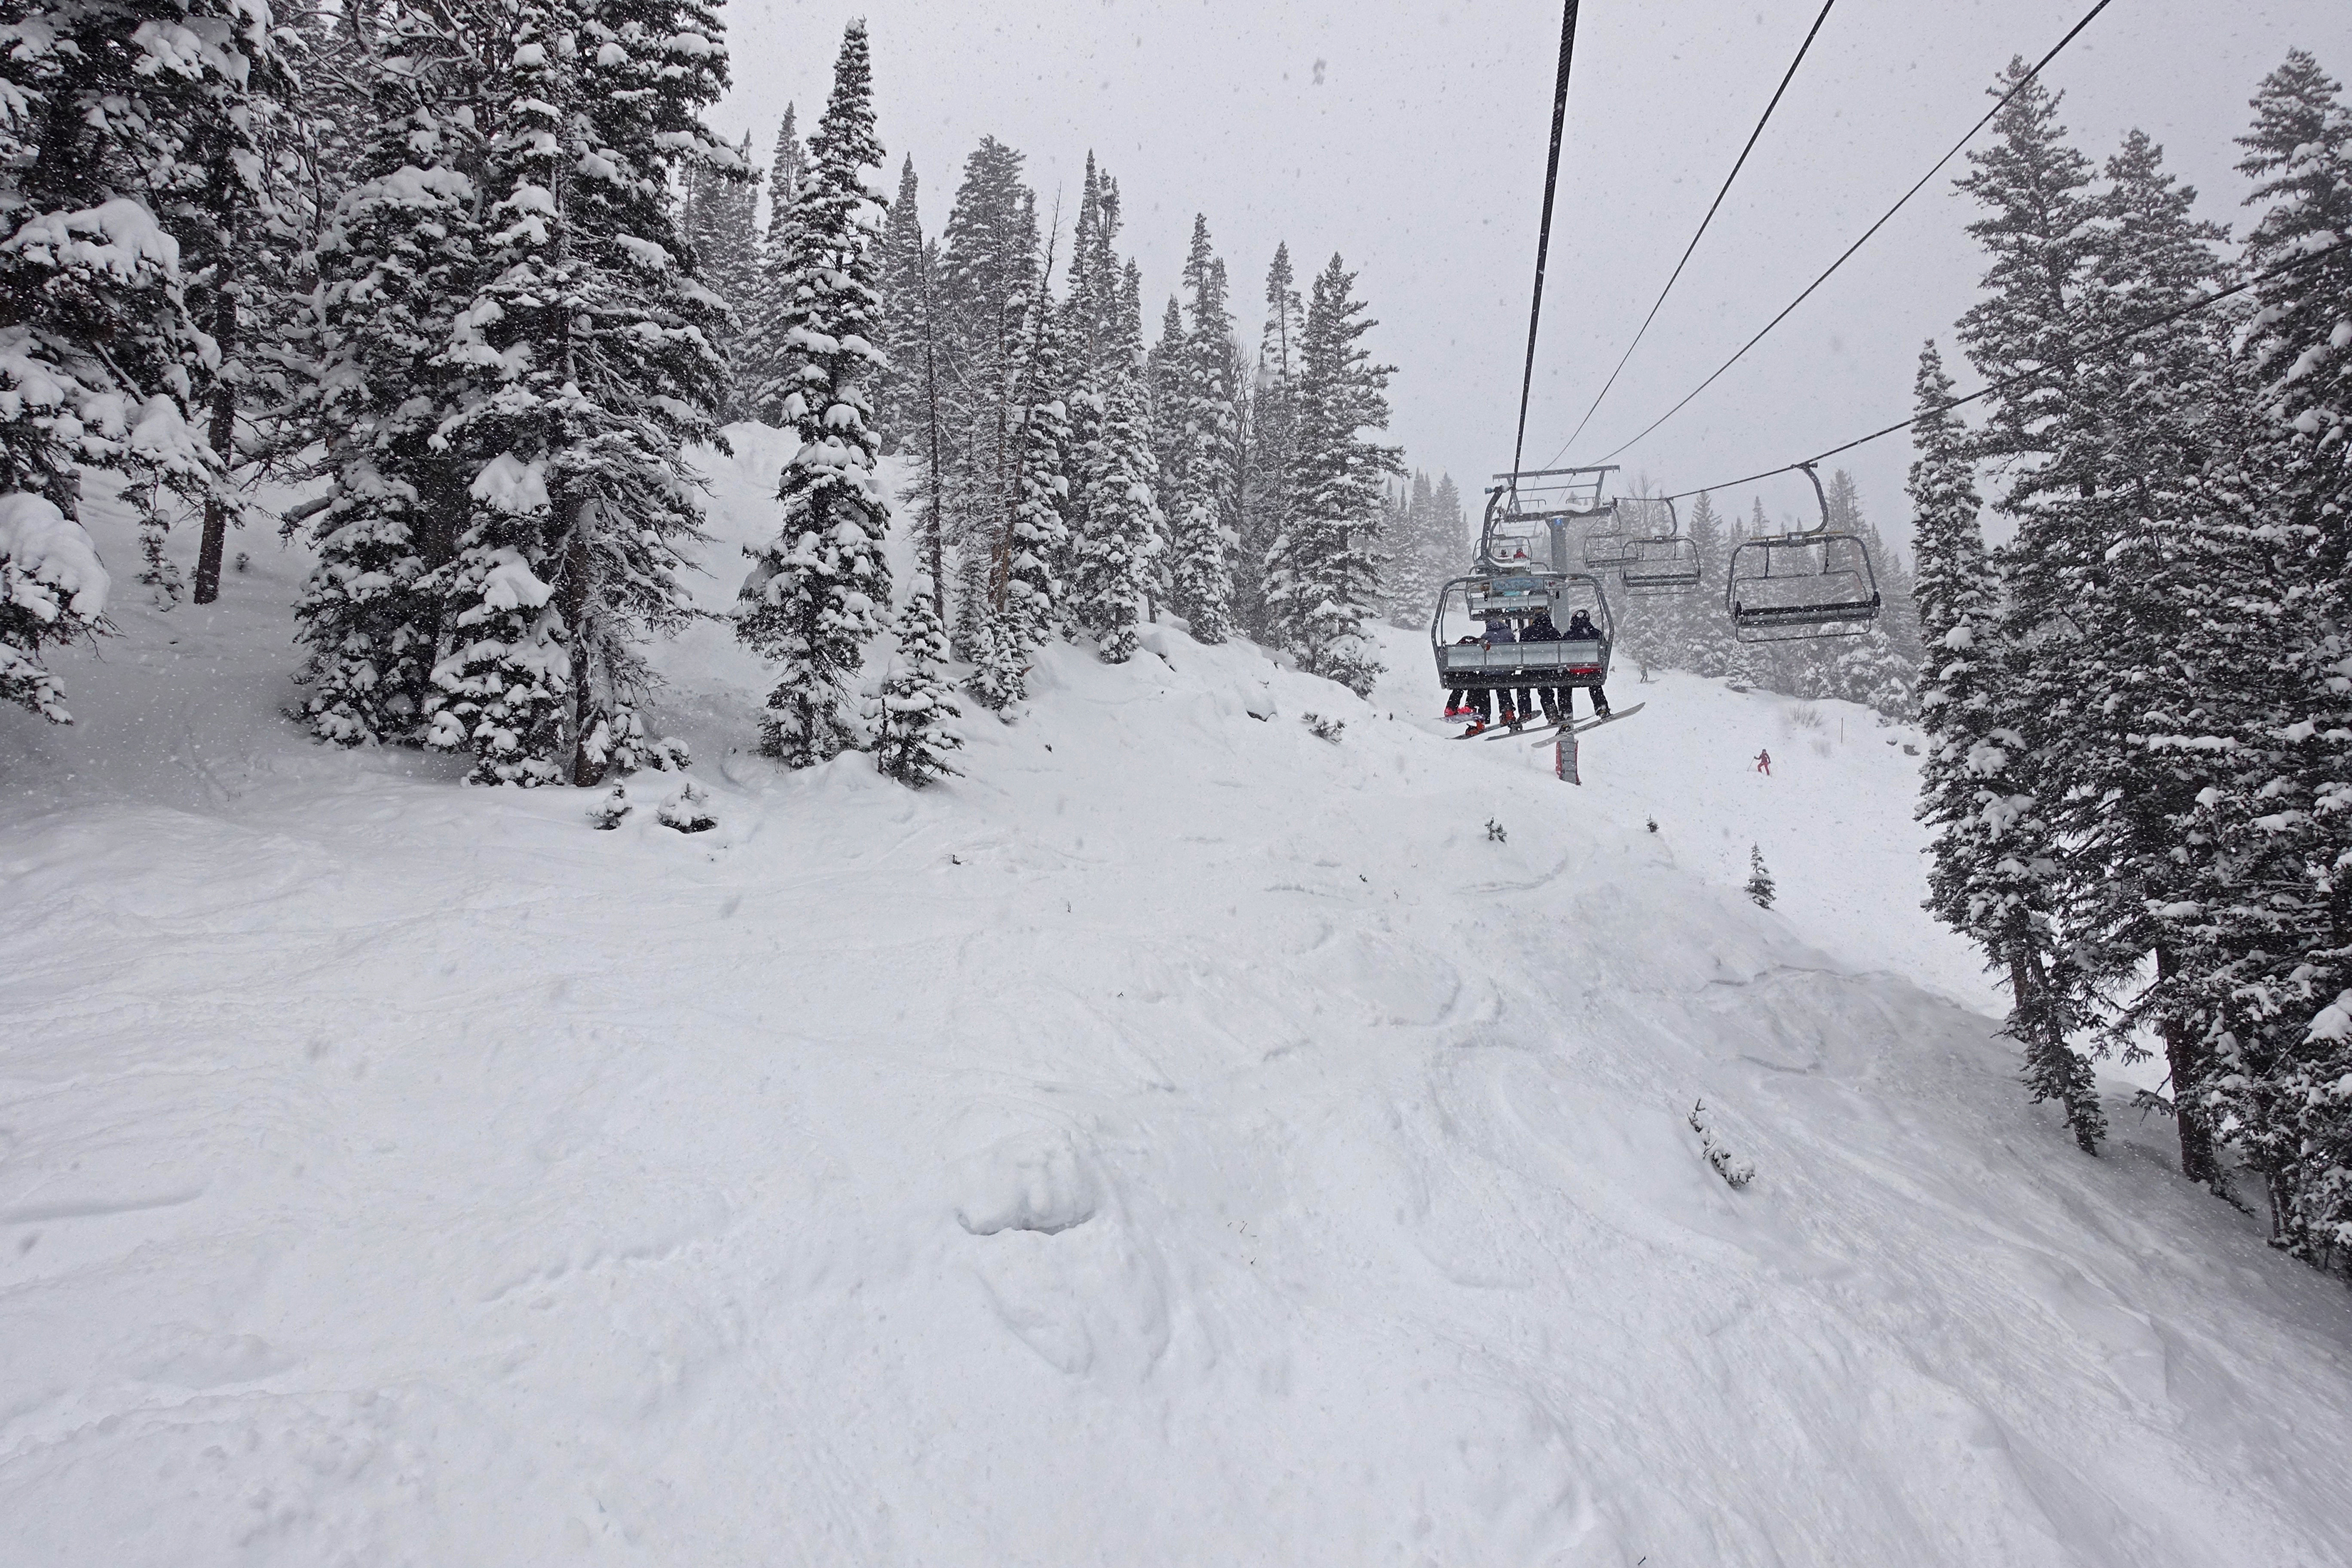 At noon under Thunder chair, not only has the snow been good but the lack of people has made the riding exceptional!